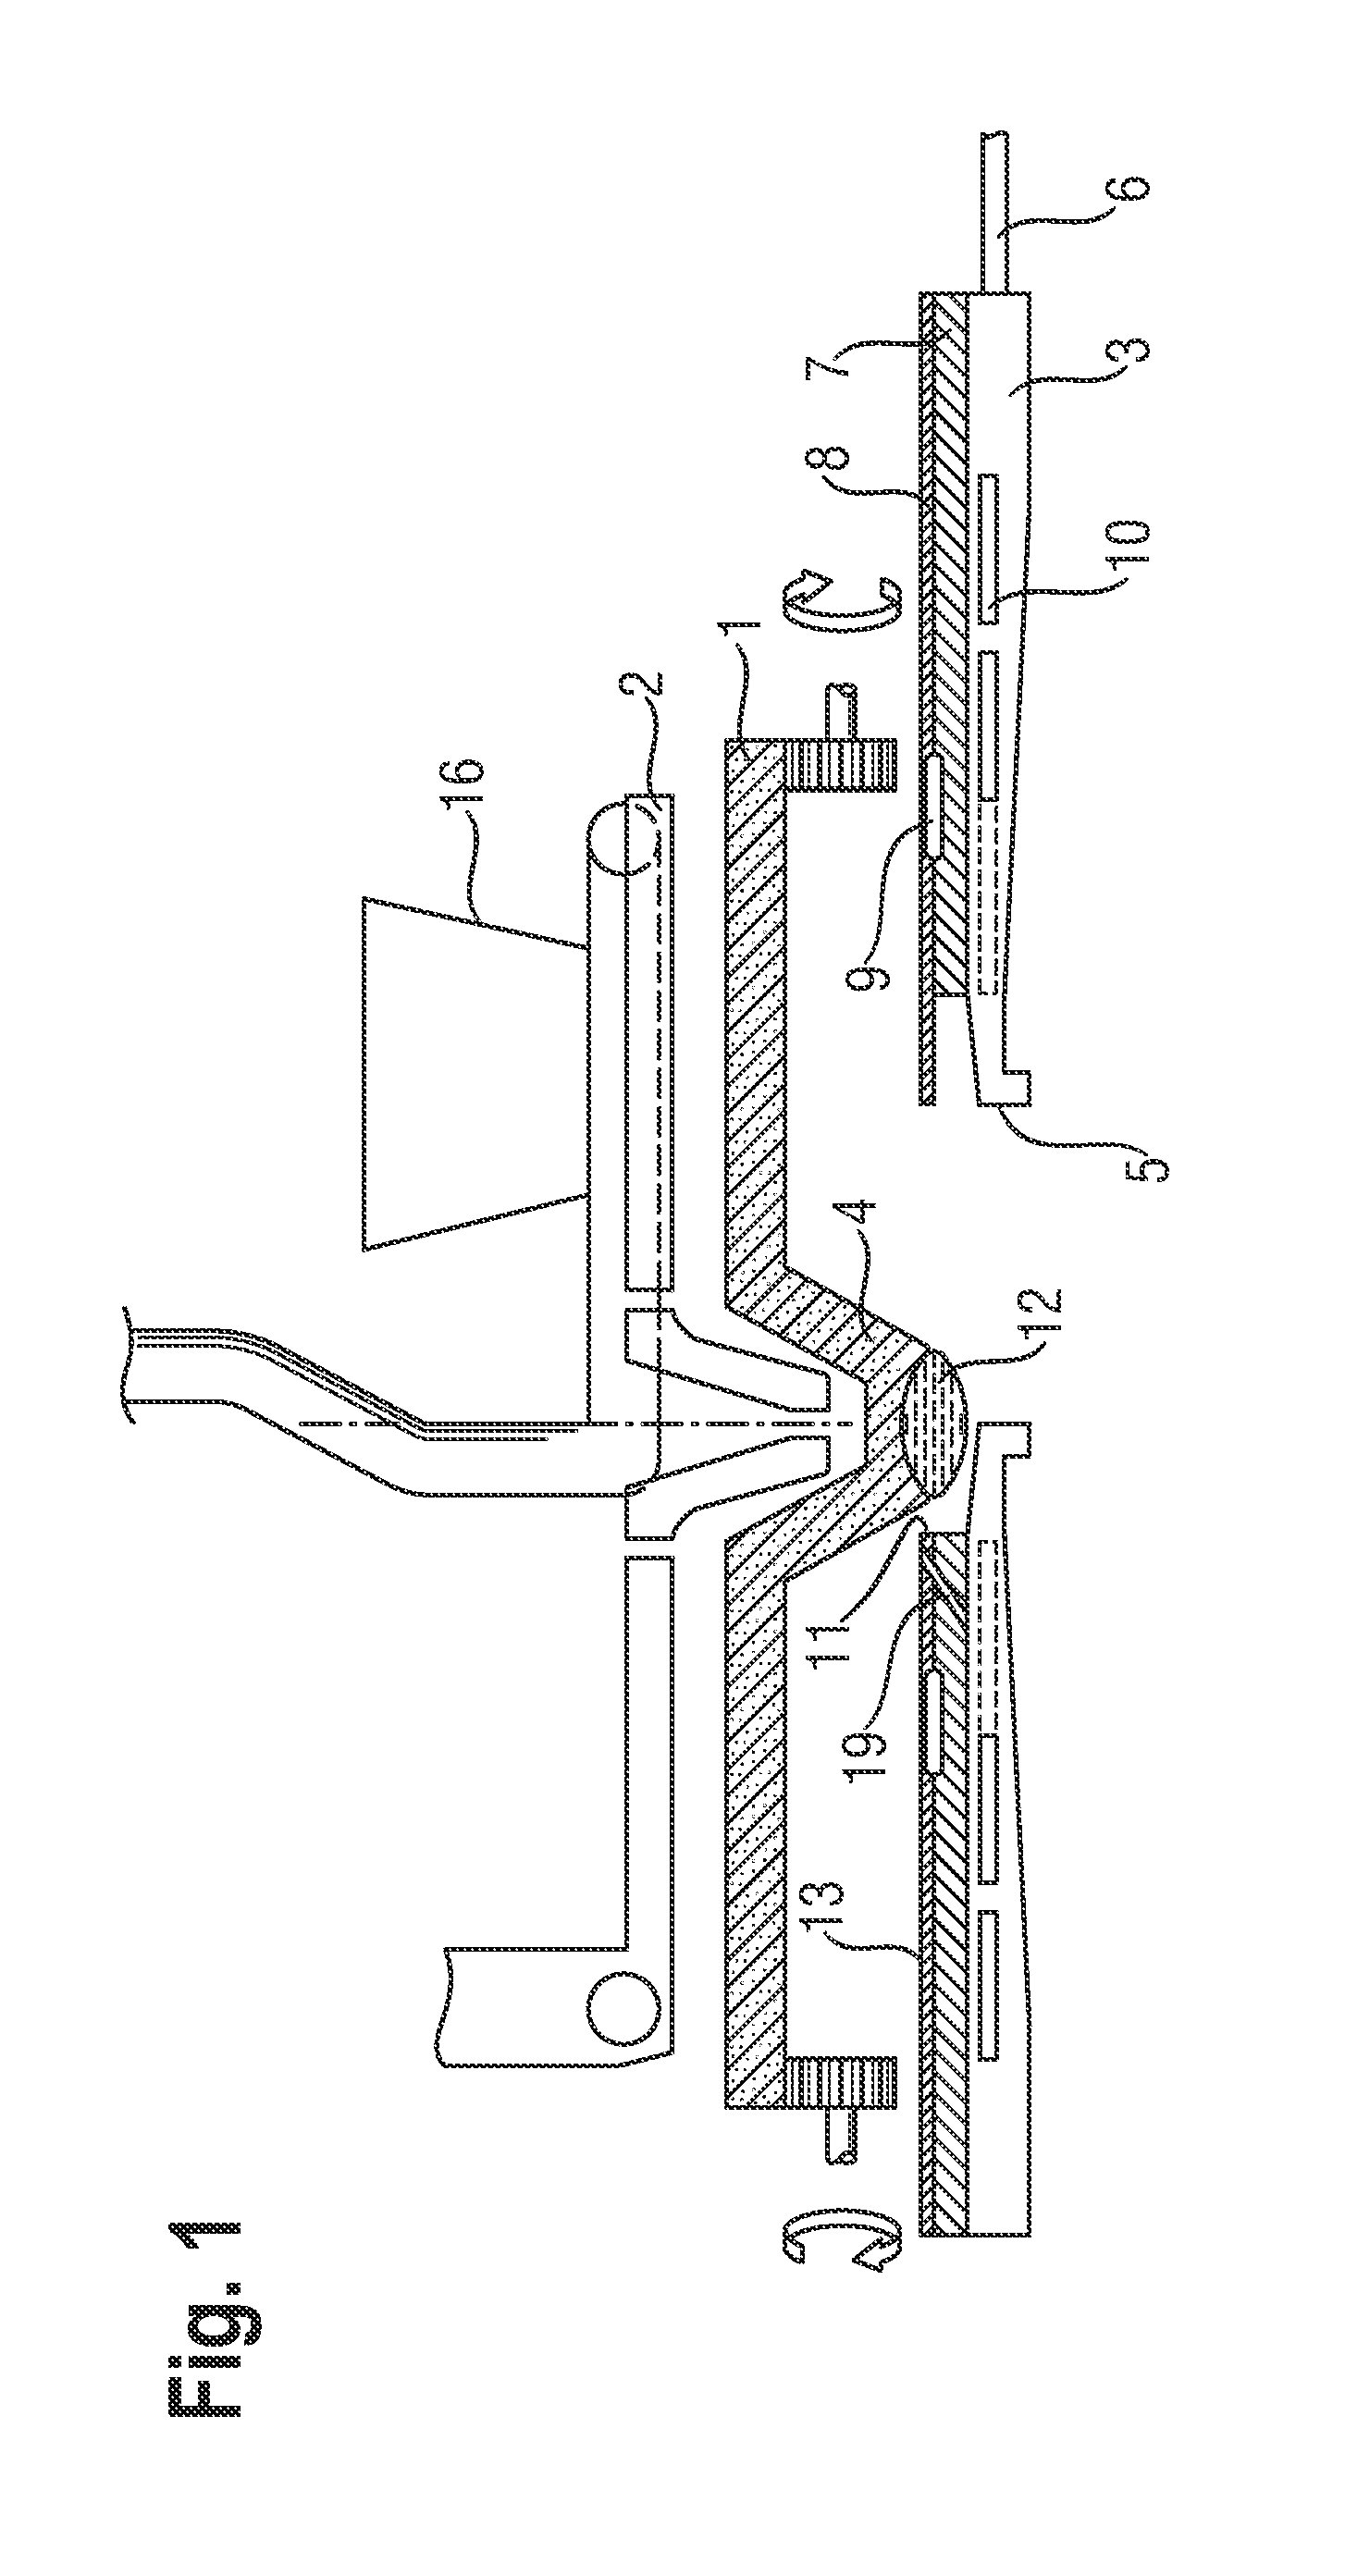 Device For Producing A Single Crystal Composed Of Silicon By Remelting Granules